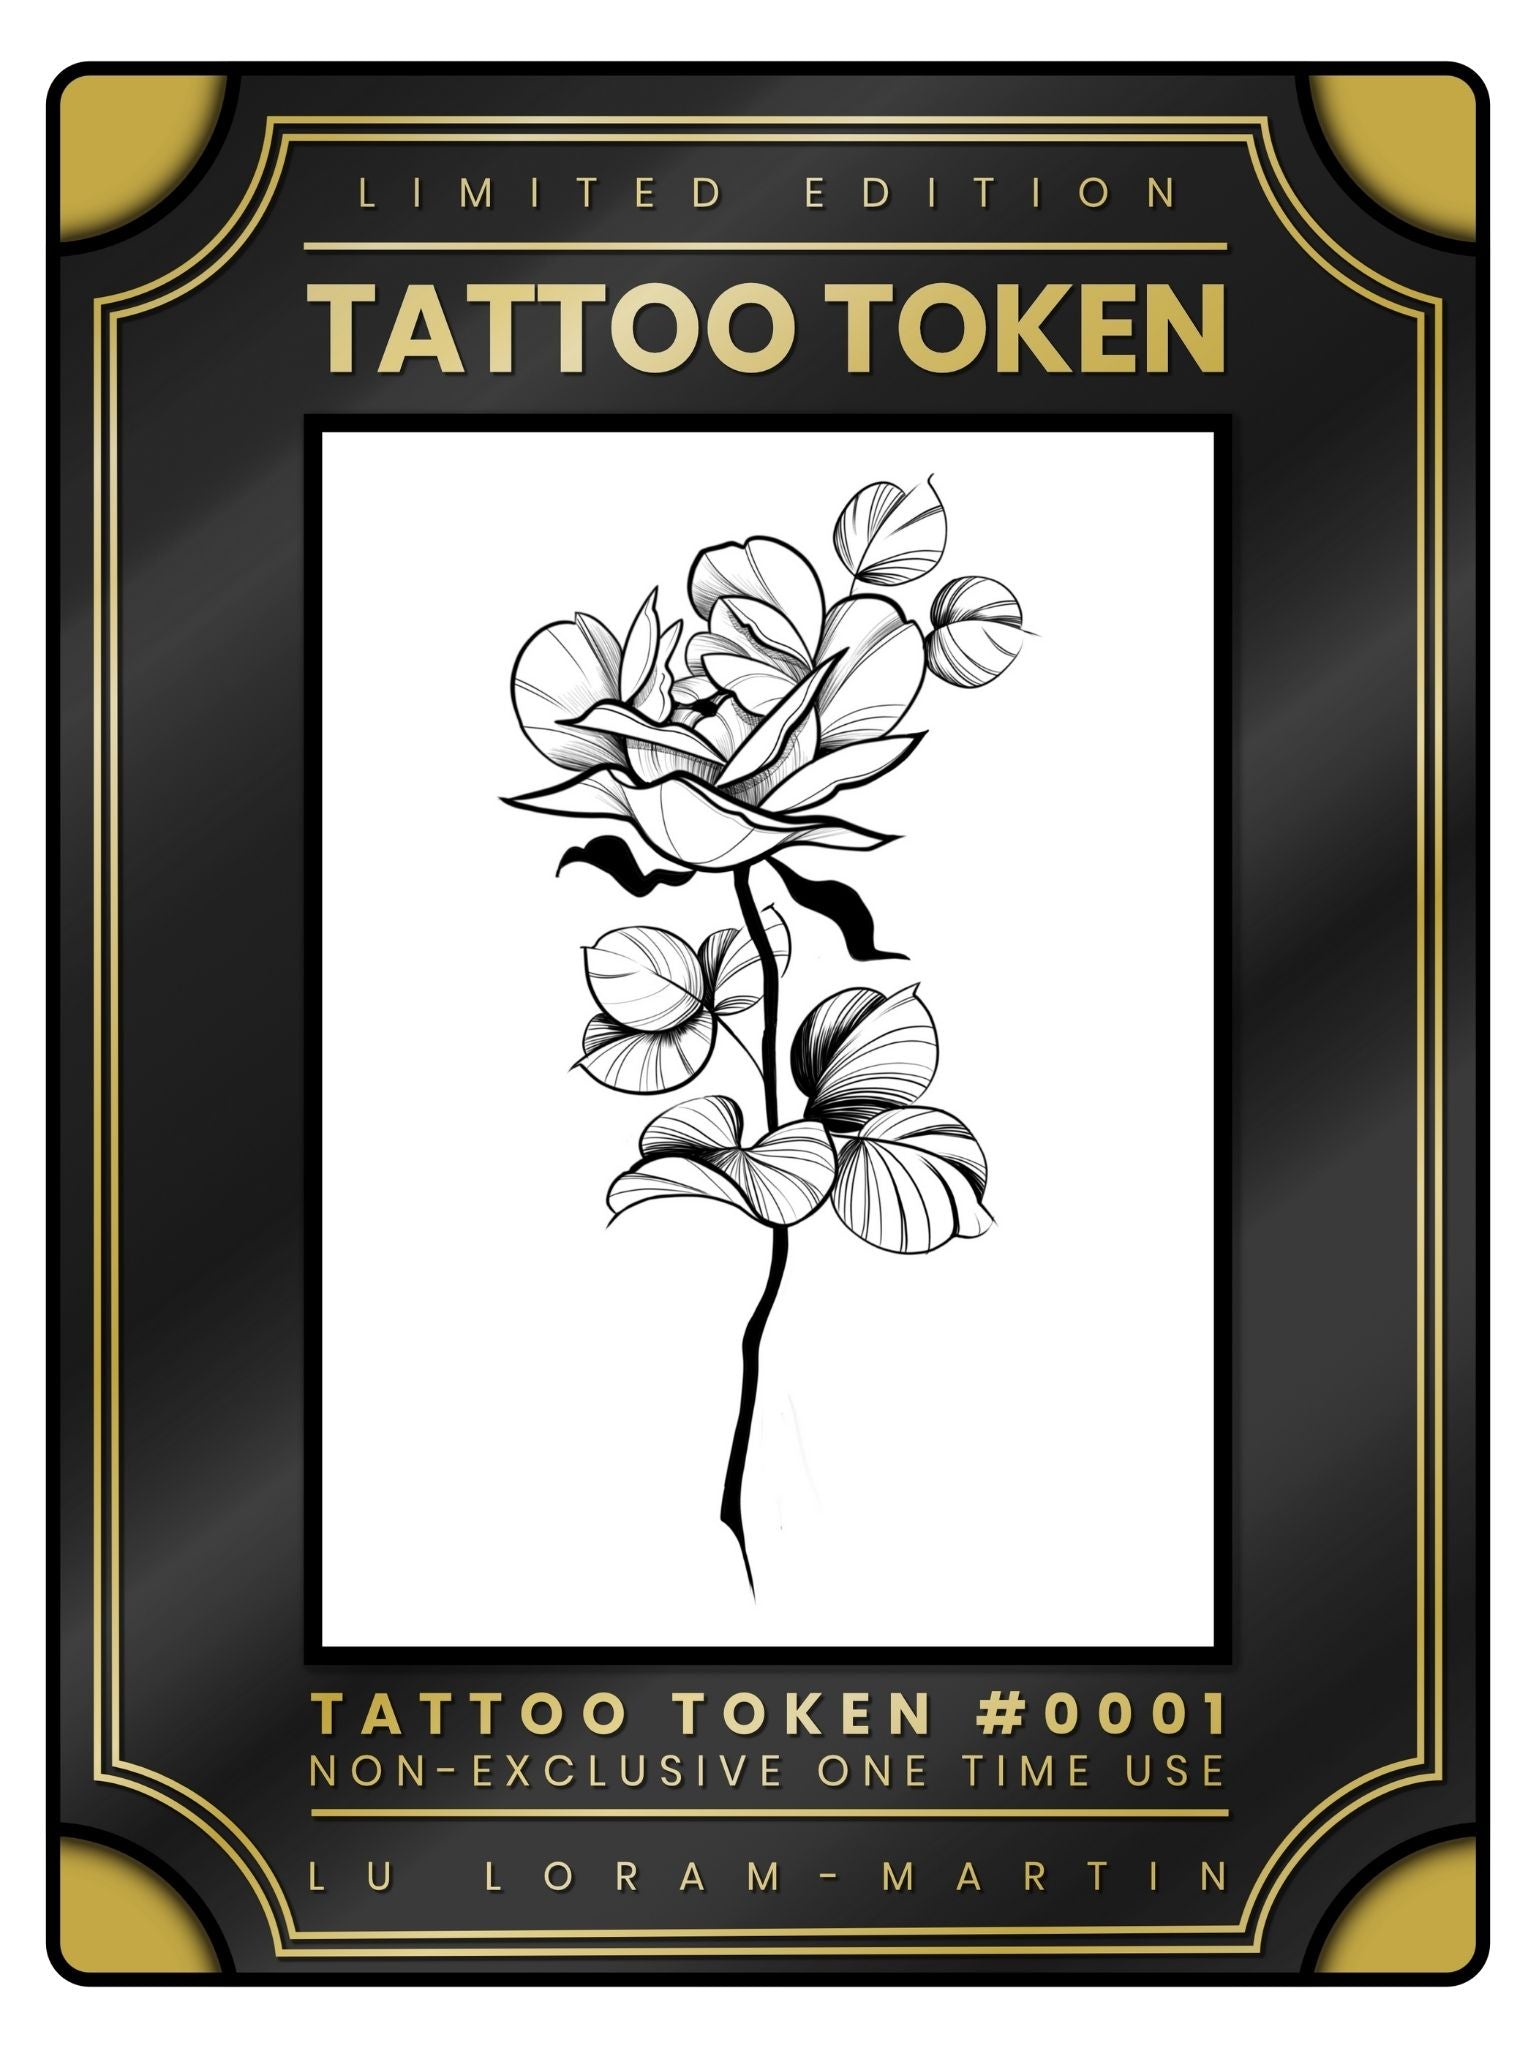 Rose tattoo token design in black line work and shading, illustrated by female floral tattoo artist Lu Loram Martin, Toronto, Canada